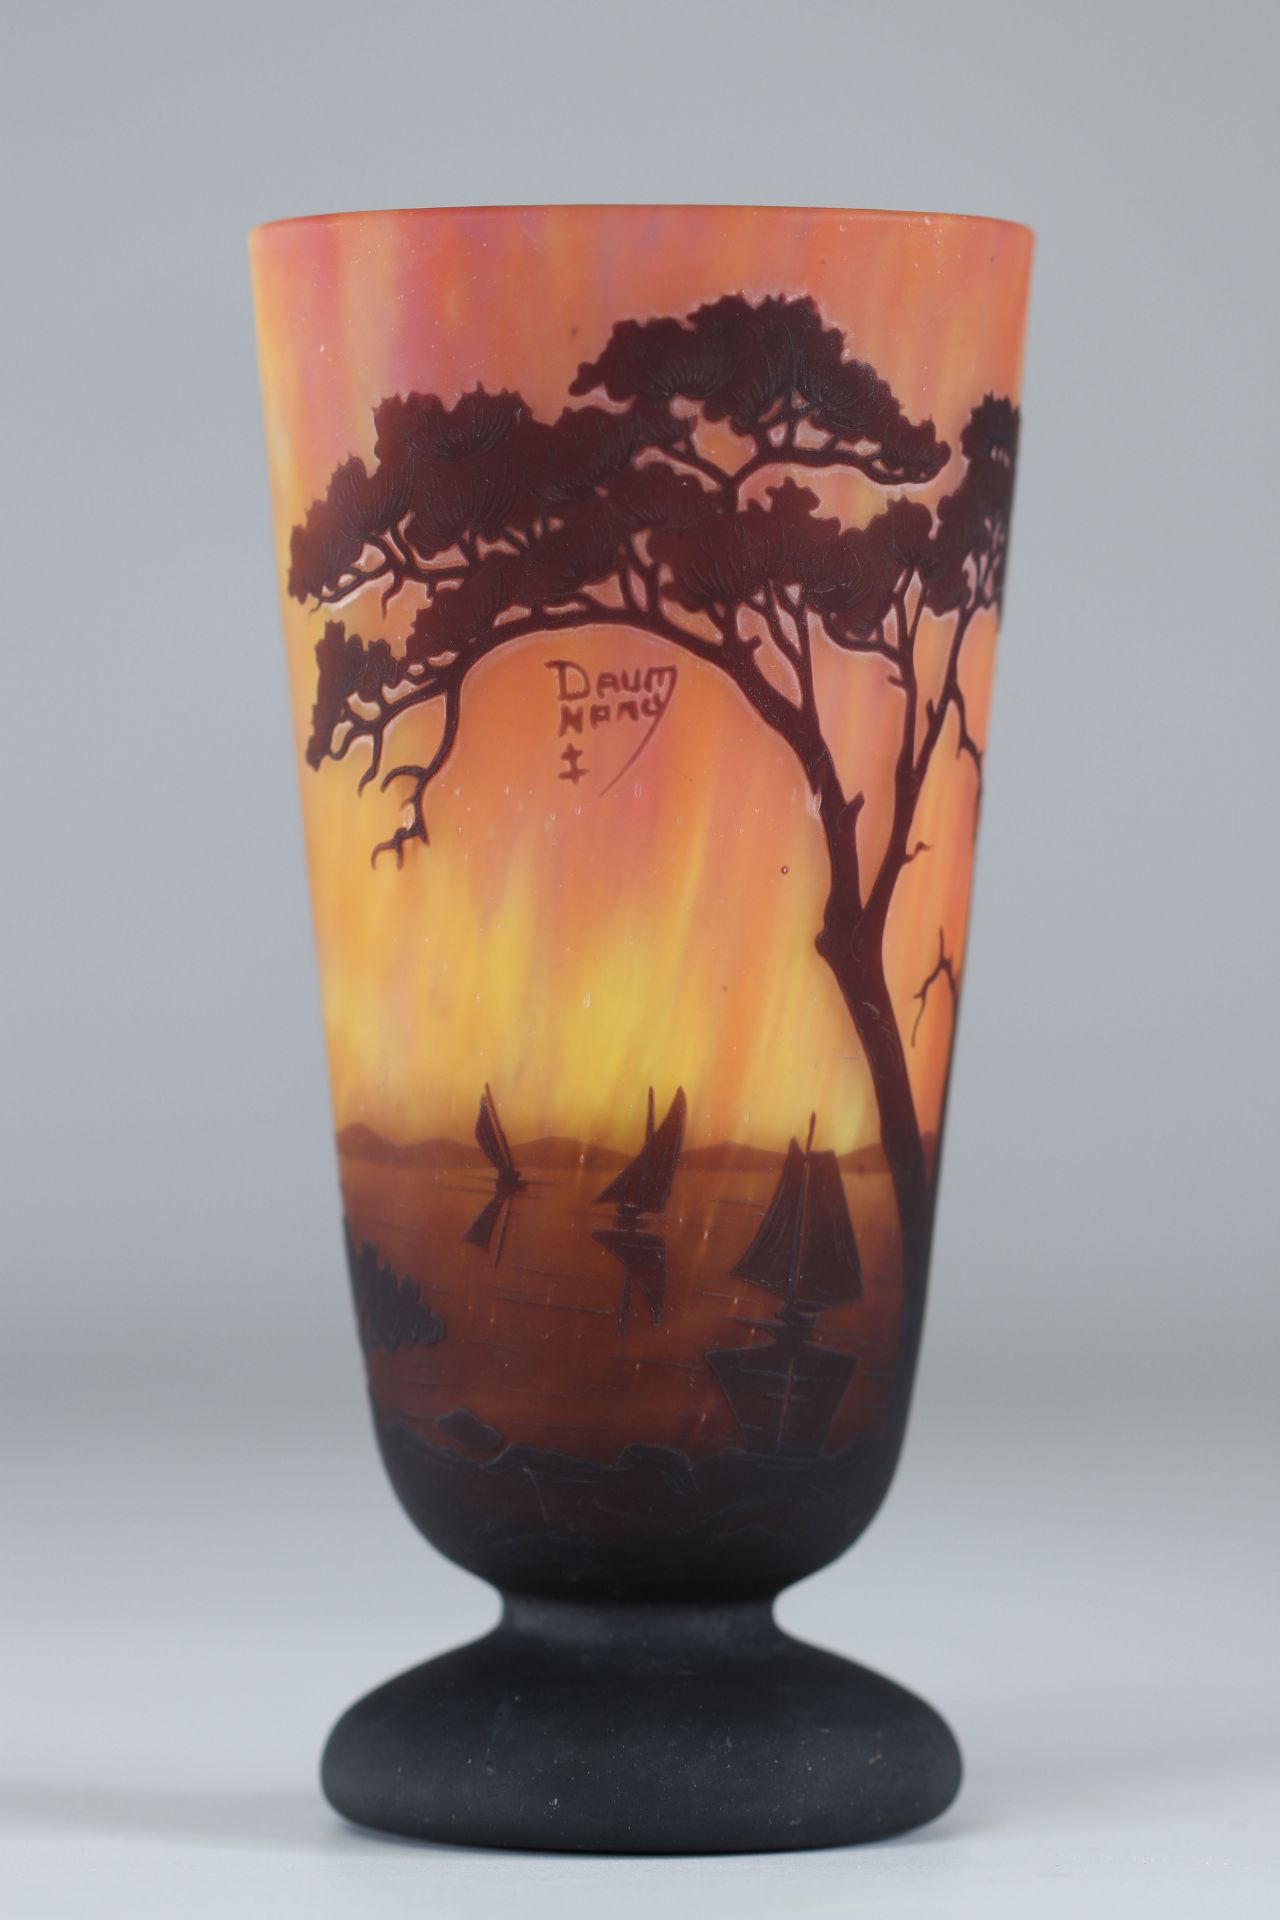 Daum Nancy Vase cleared with acid "landscape decor and sailboats"